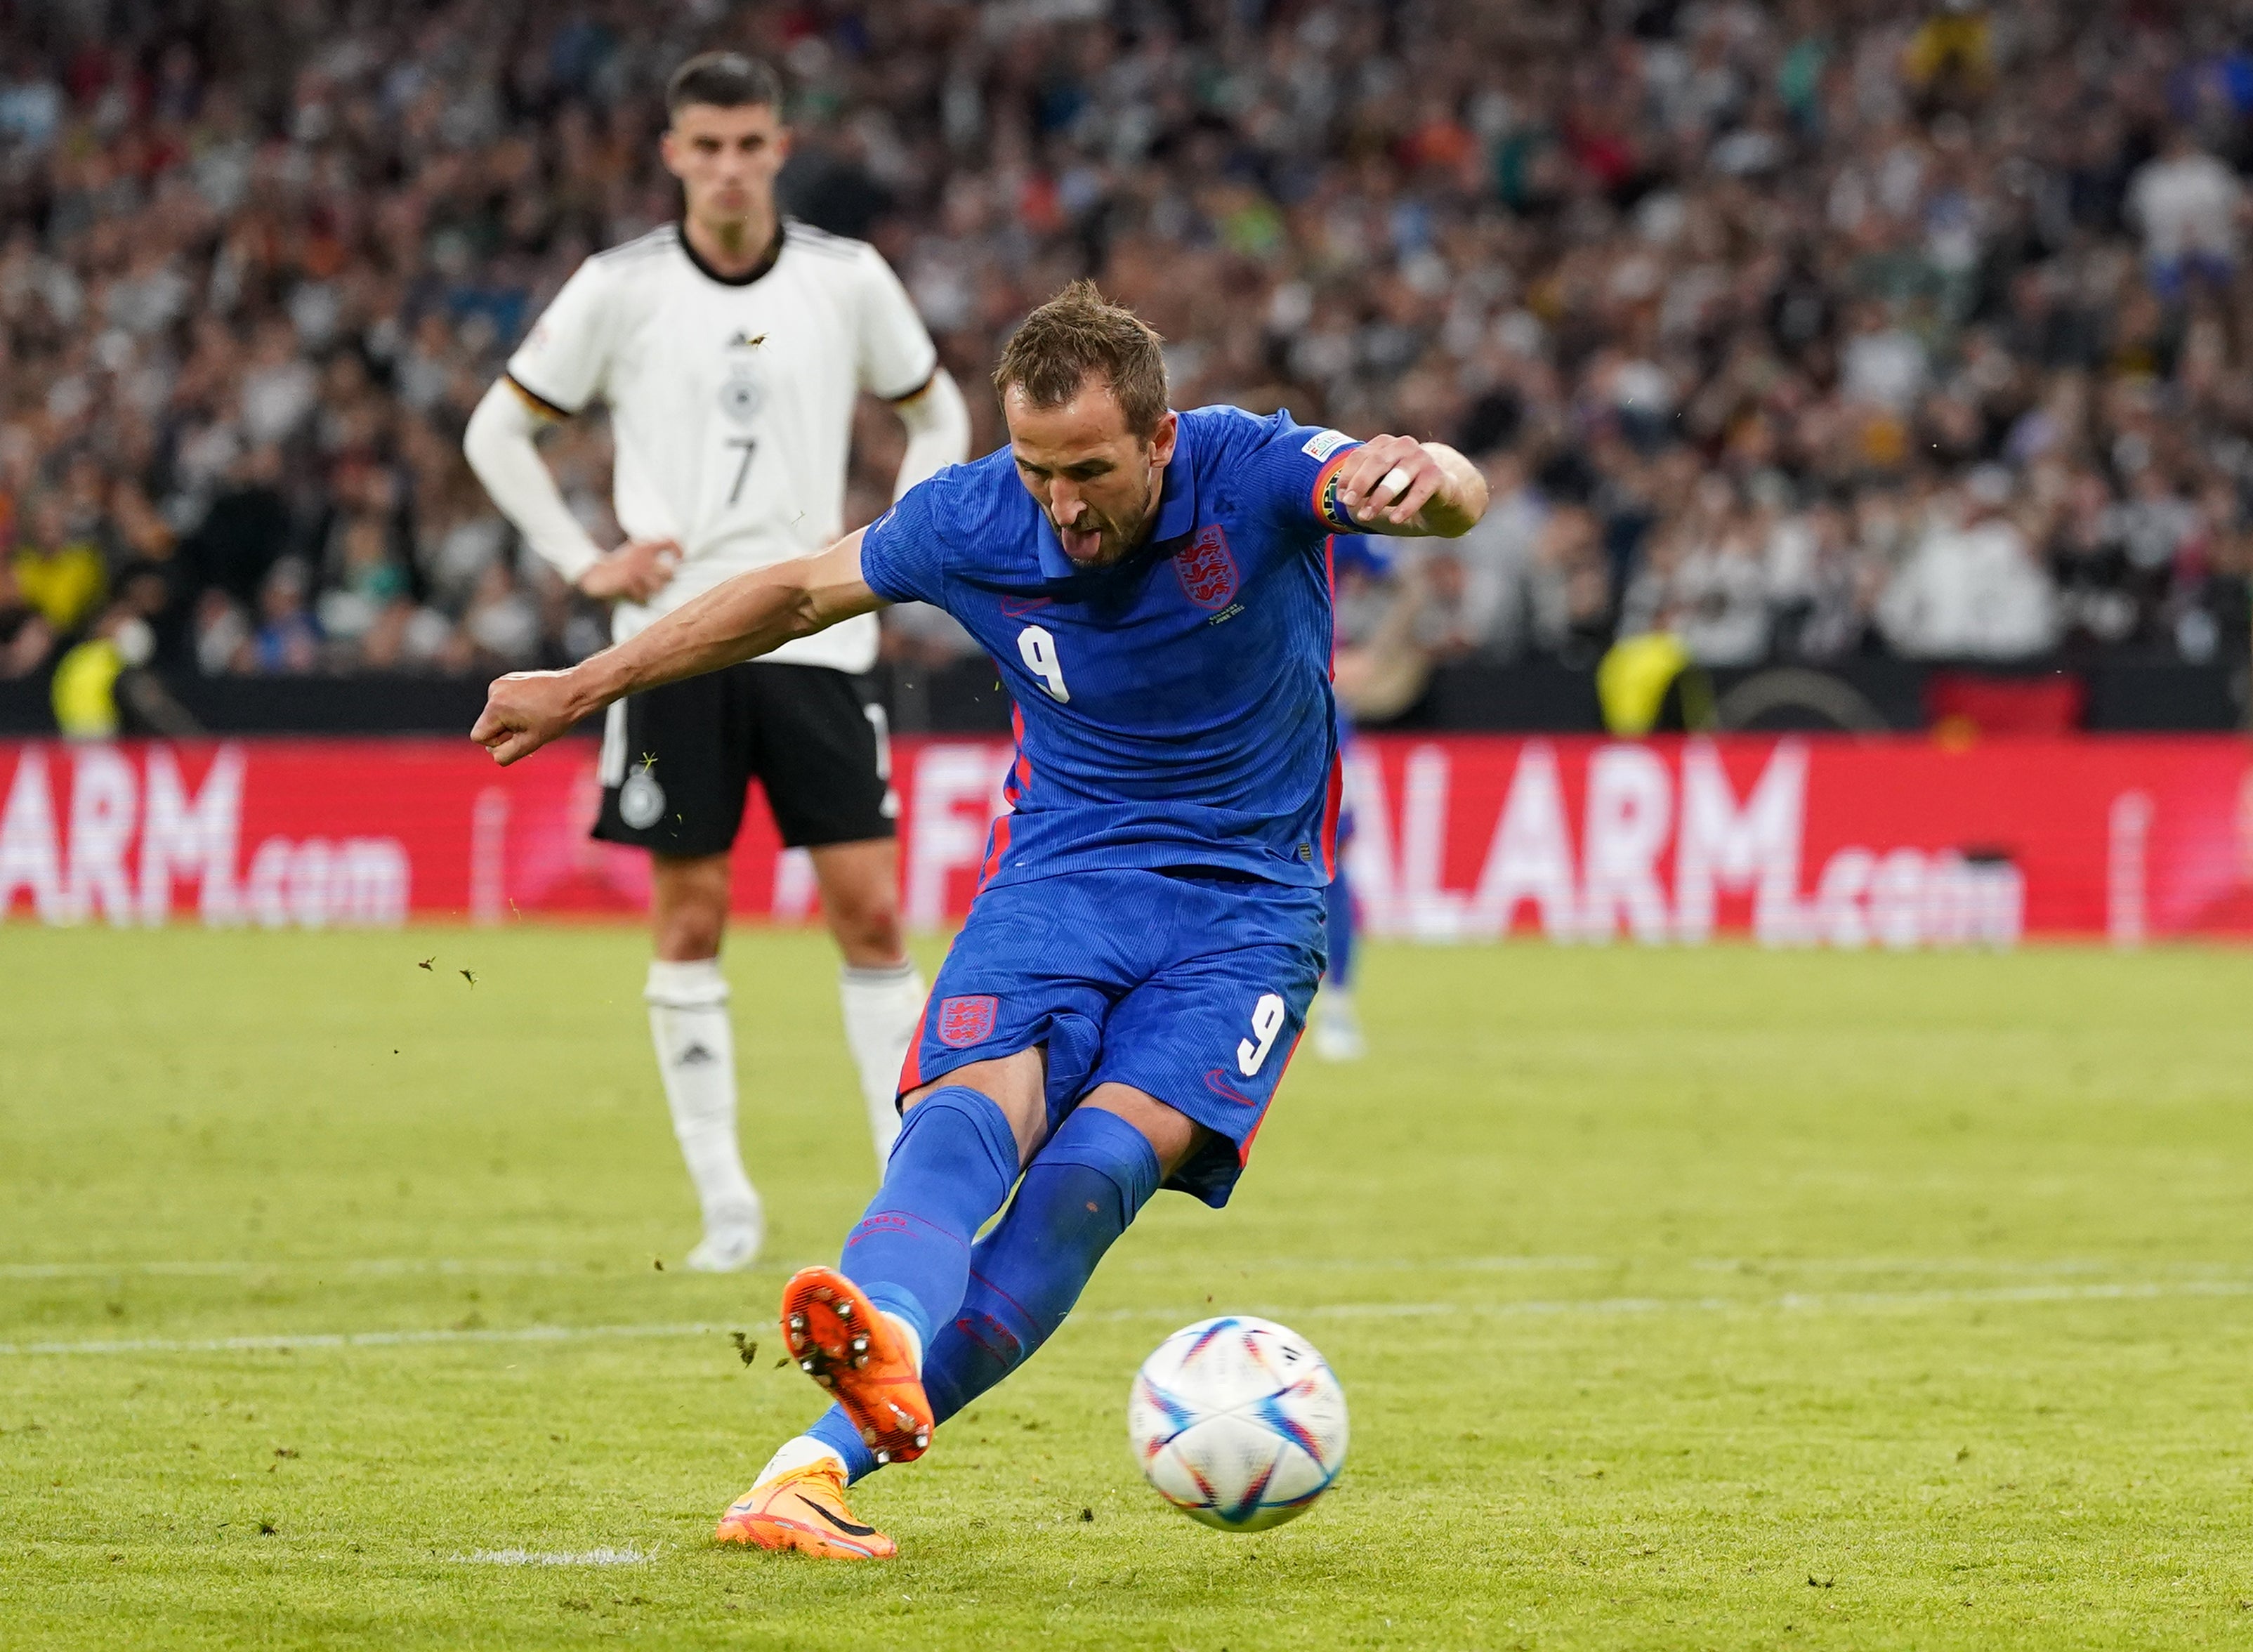 Harry Kane scored his 50th England goal in the Nations League draw against Germany (Nick Potts/PA)